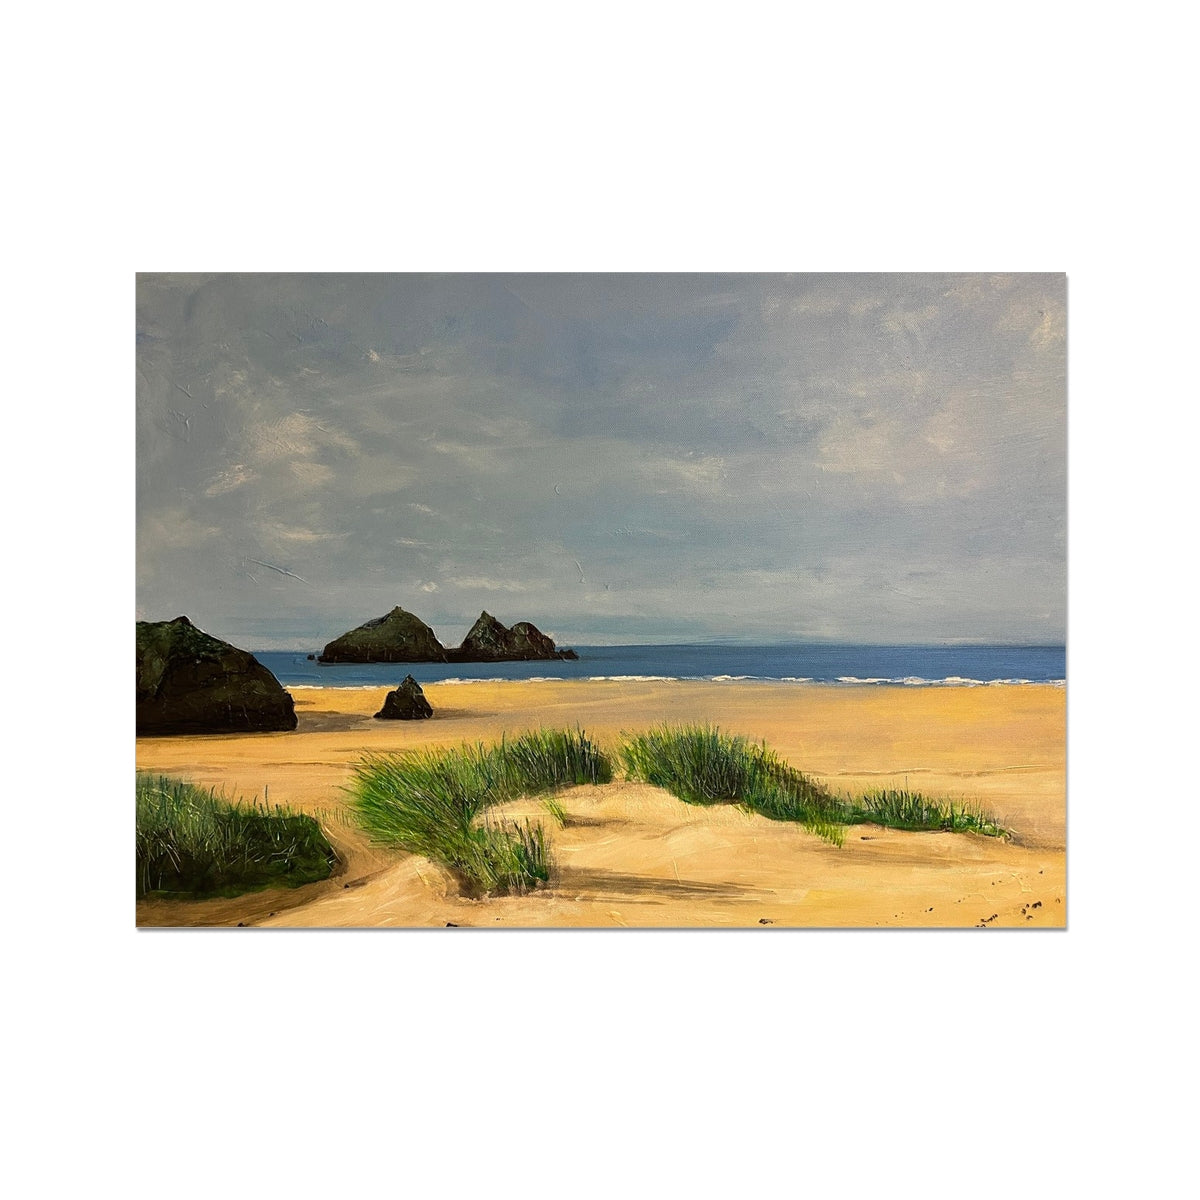 Holywell Bay Cornwall Painting | Fine Art Prints From Scotland-Unframed Prints-World Art Gallery-A2 Landscape-Paintings, Prints, Homeware, Art Gifts From Scotland By Scottish Artist Kevin Hunter